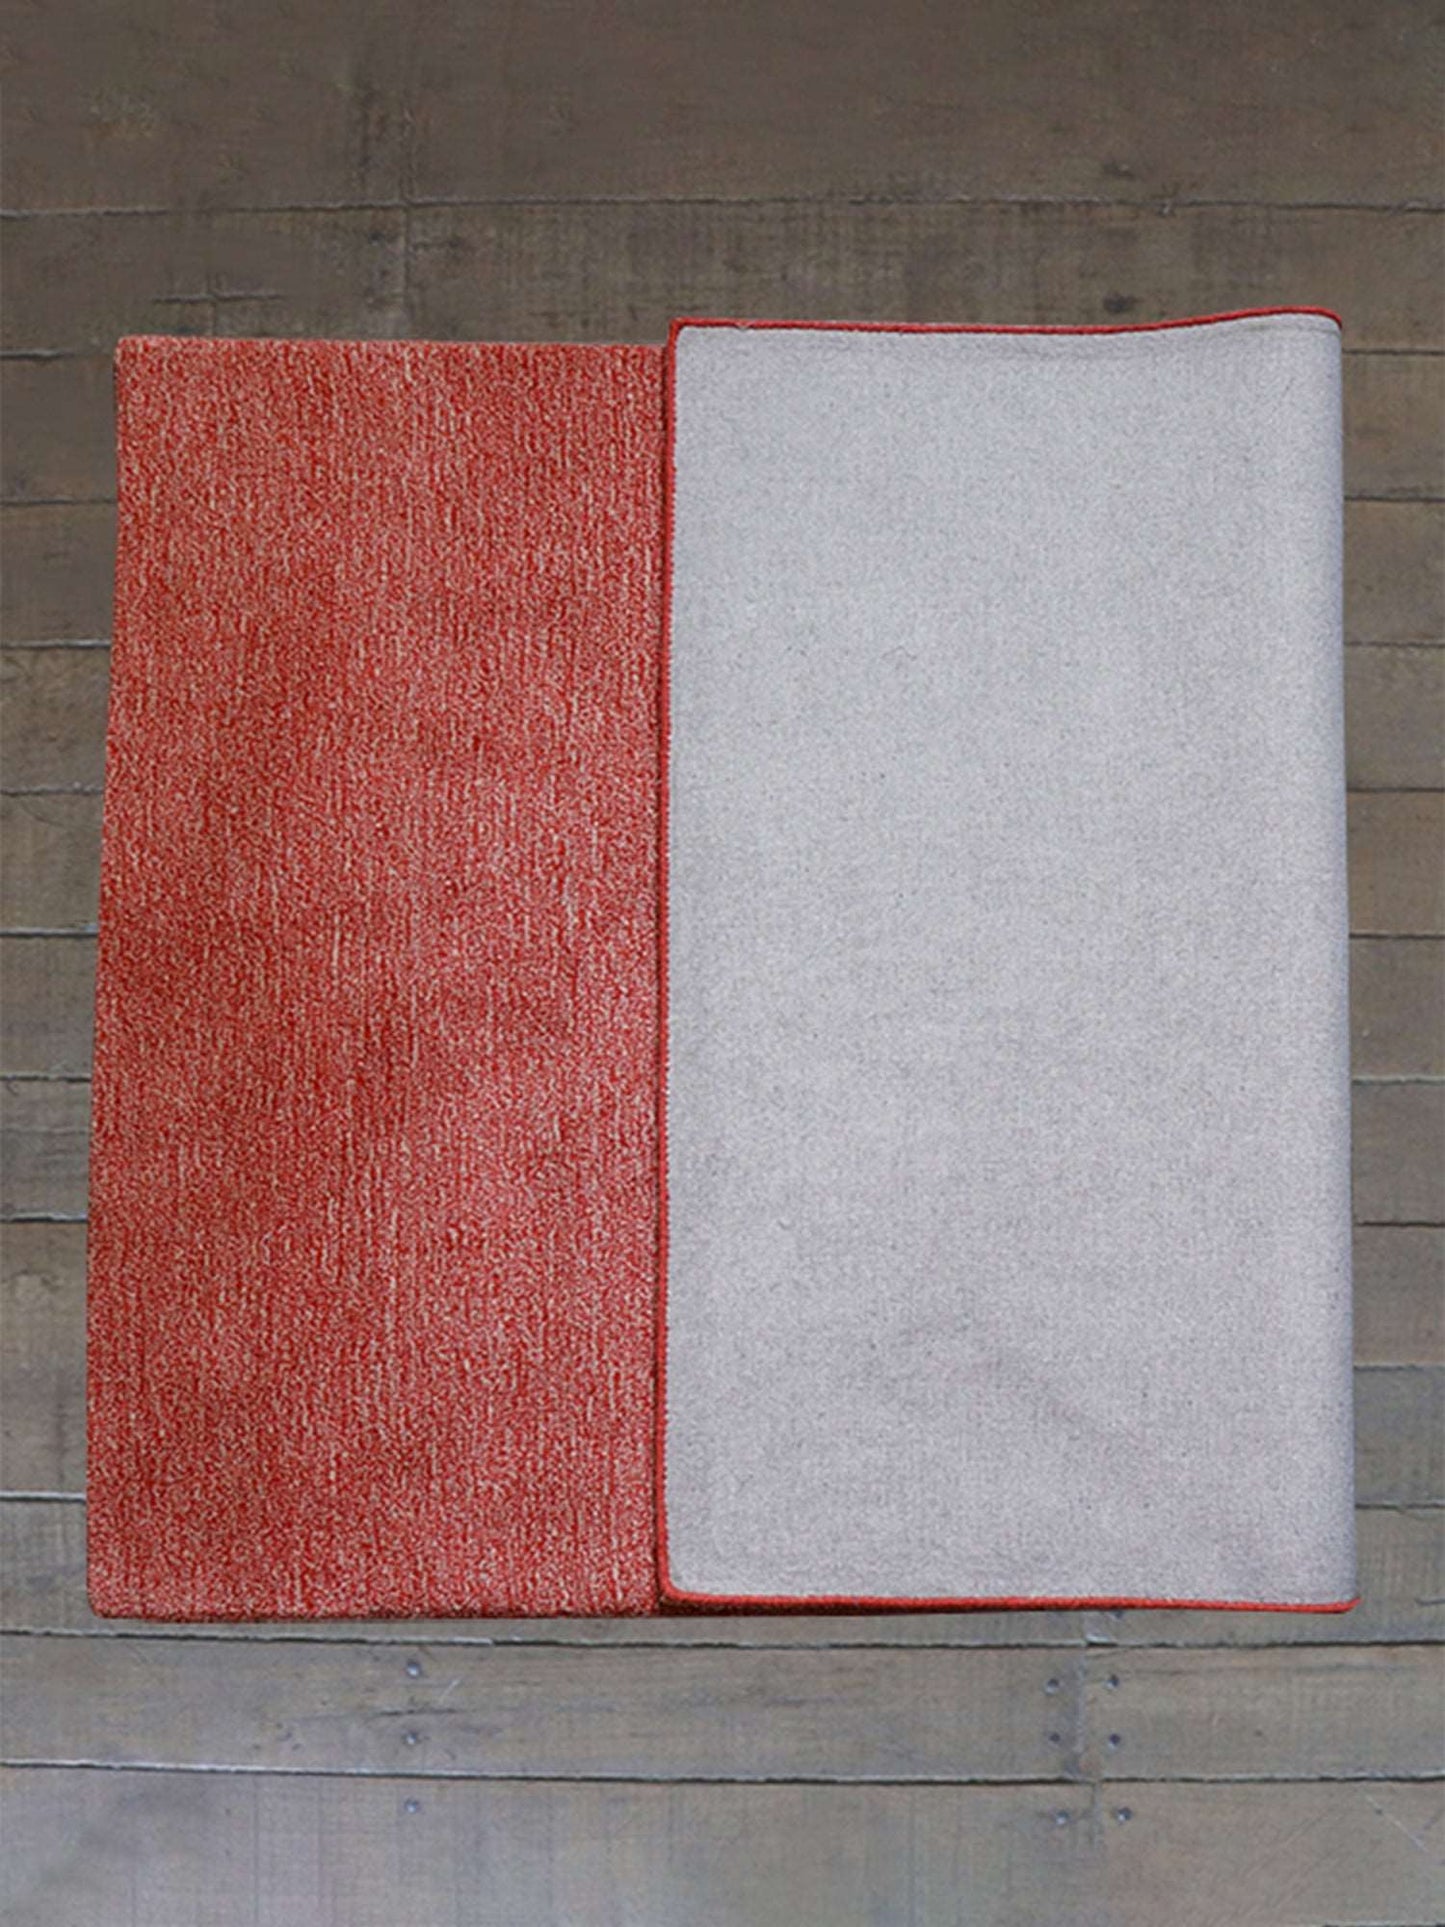 Carpet Hand Tufted 100% Woollen Red Grey Ombre - 4ft X 6ft